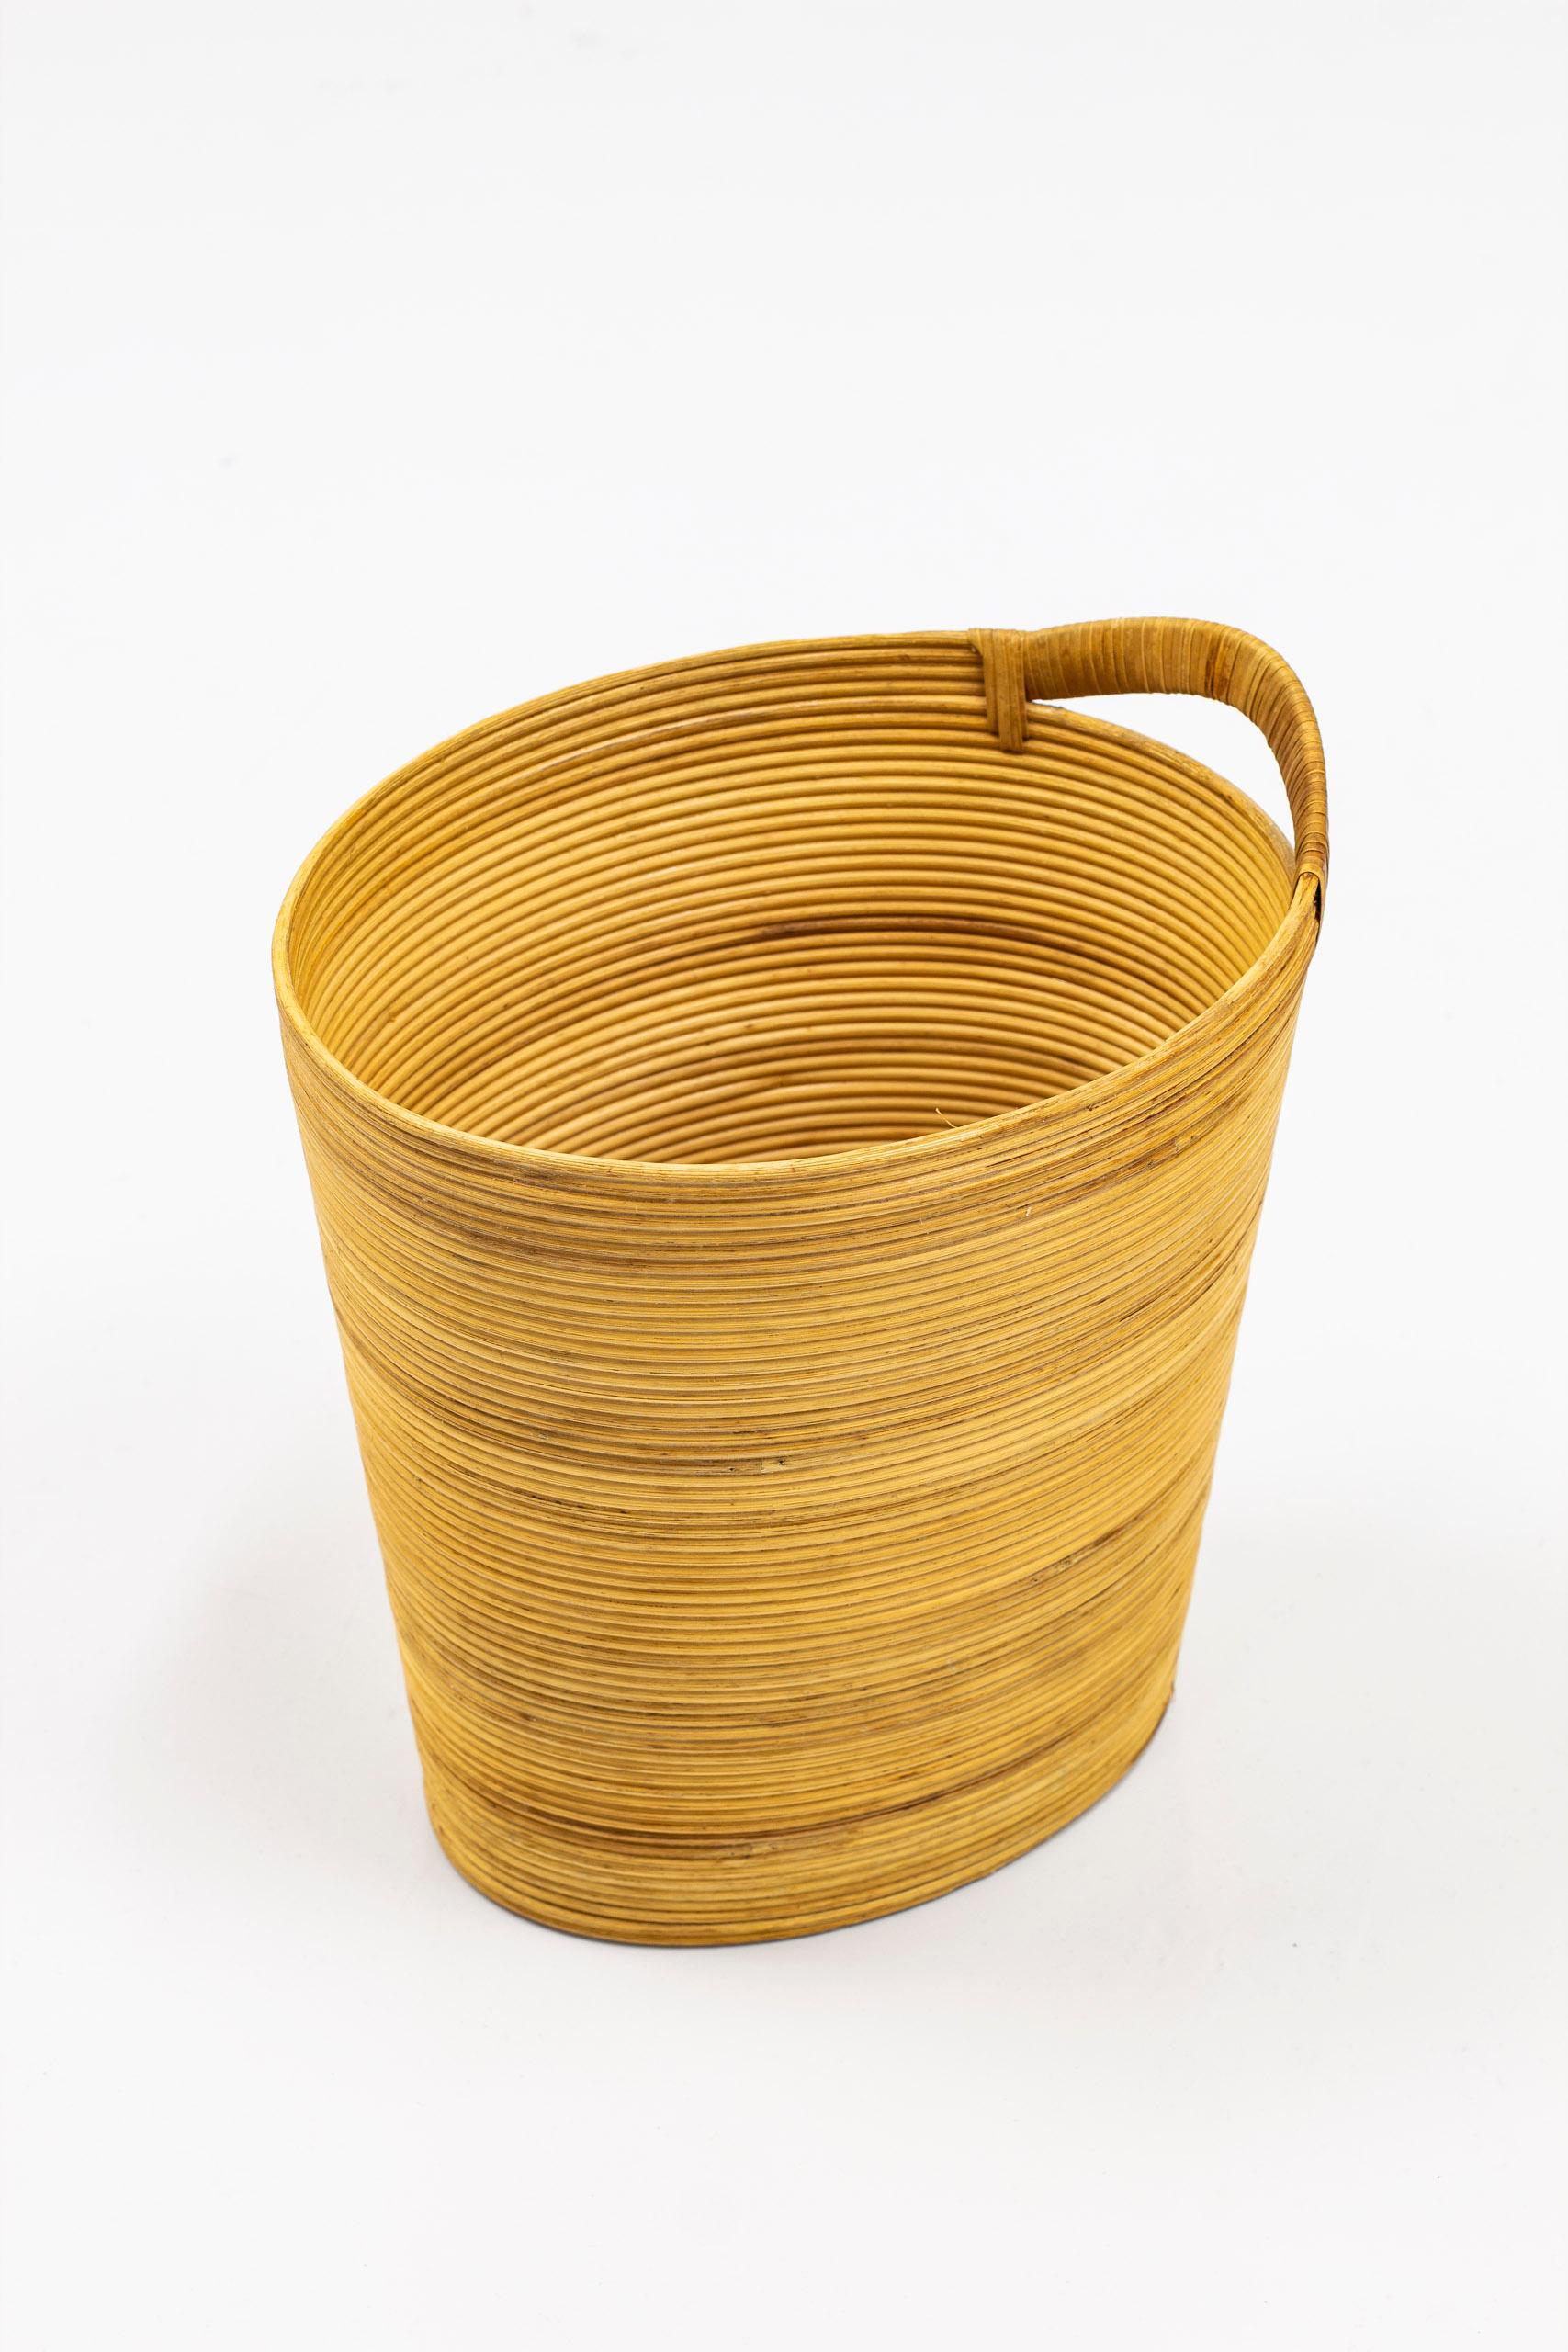 Papper Basket Designed and Manufactured by Laurids Lønborg in Denmark, 1950s In Good Condition For Sale In Hägersten, SE